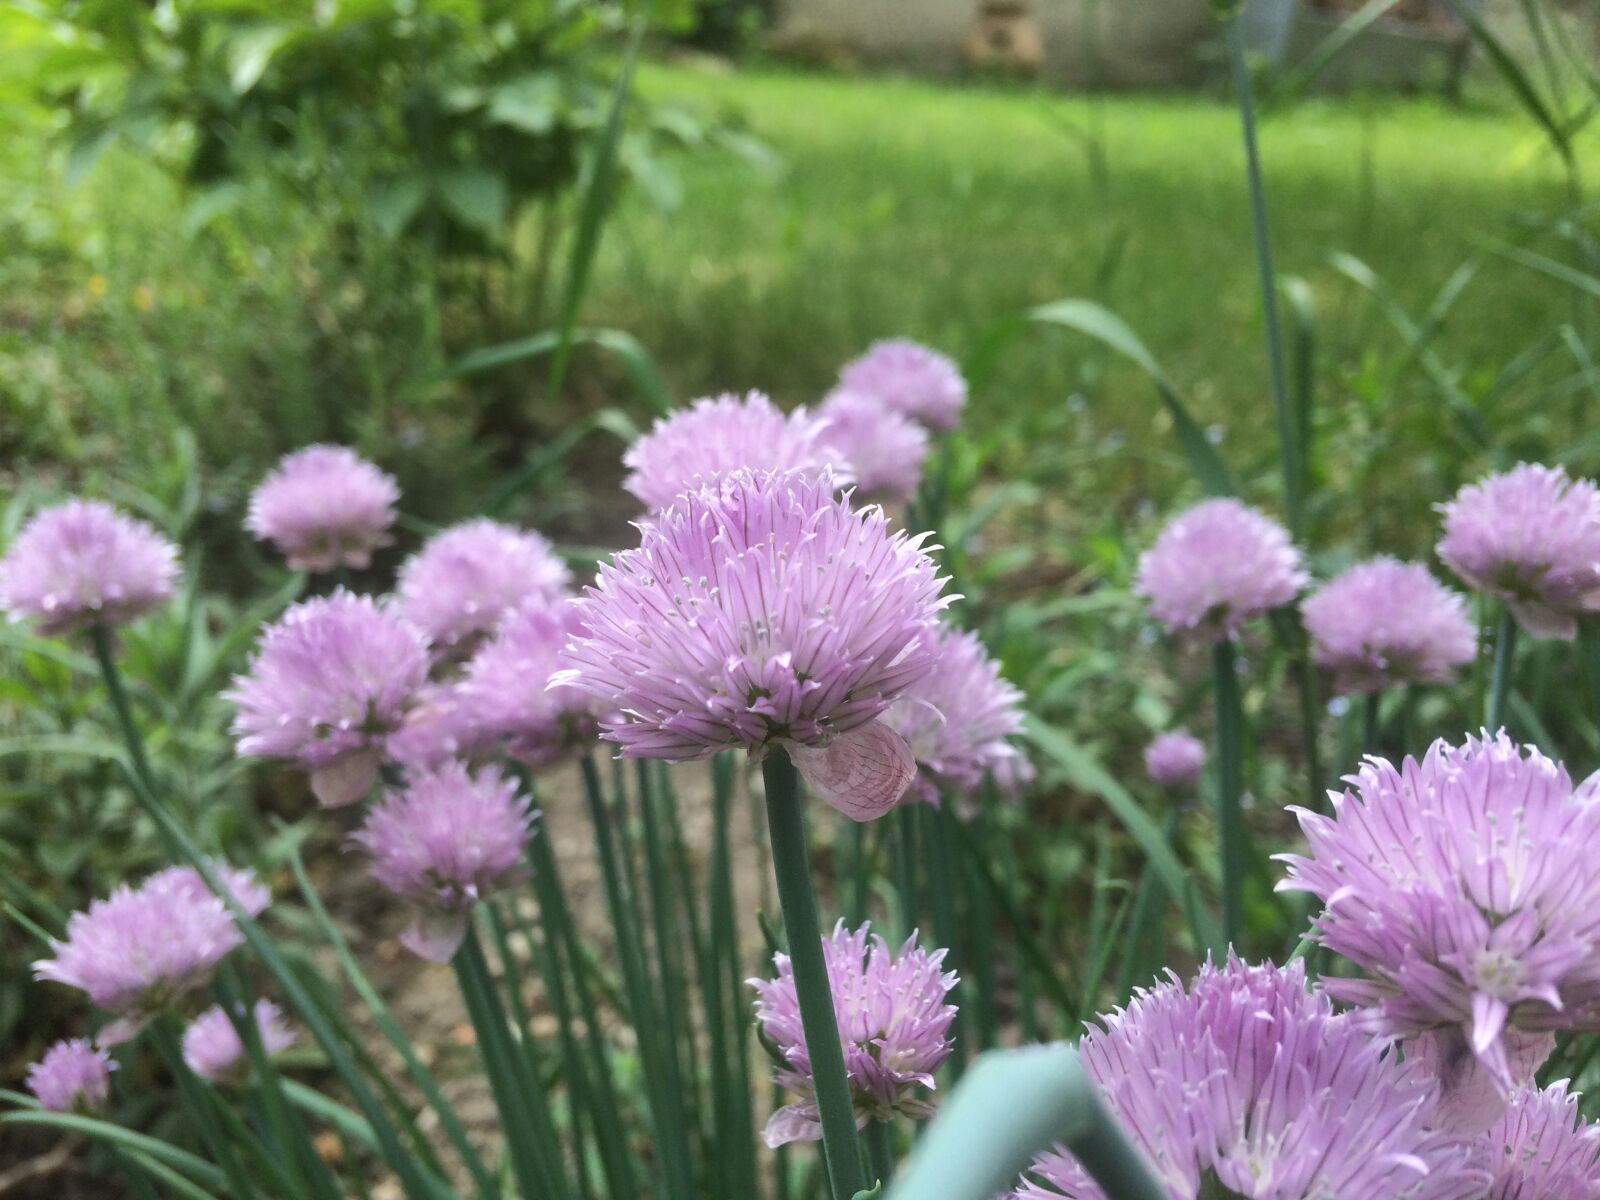 Apple iPhone 5s sample photo. Garden, flowers, chives photography